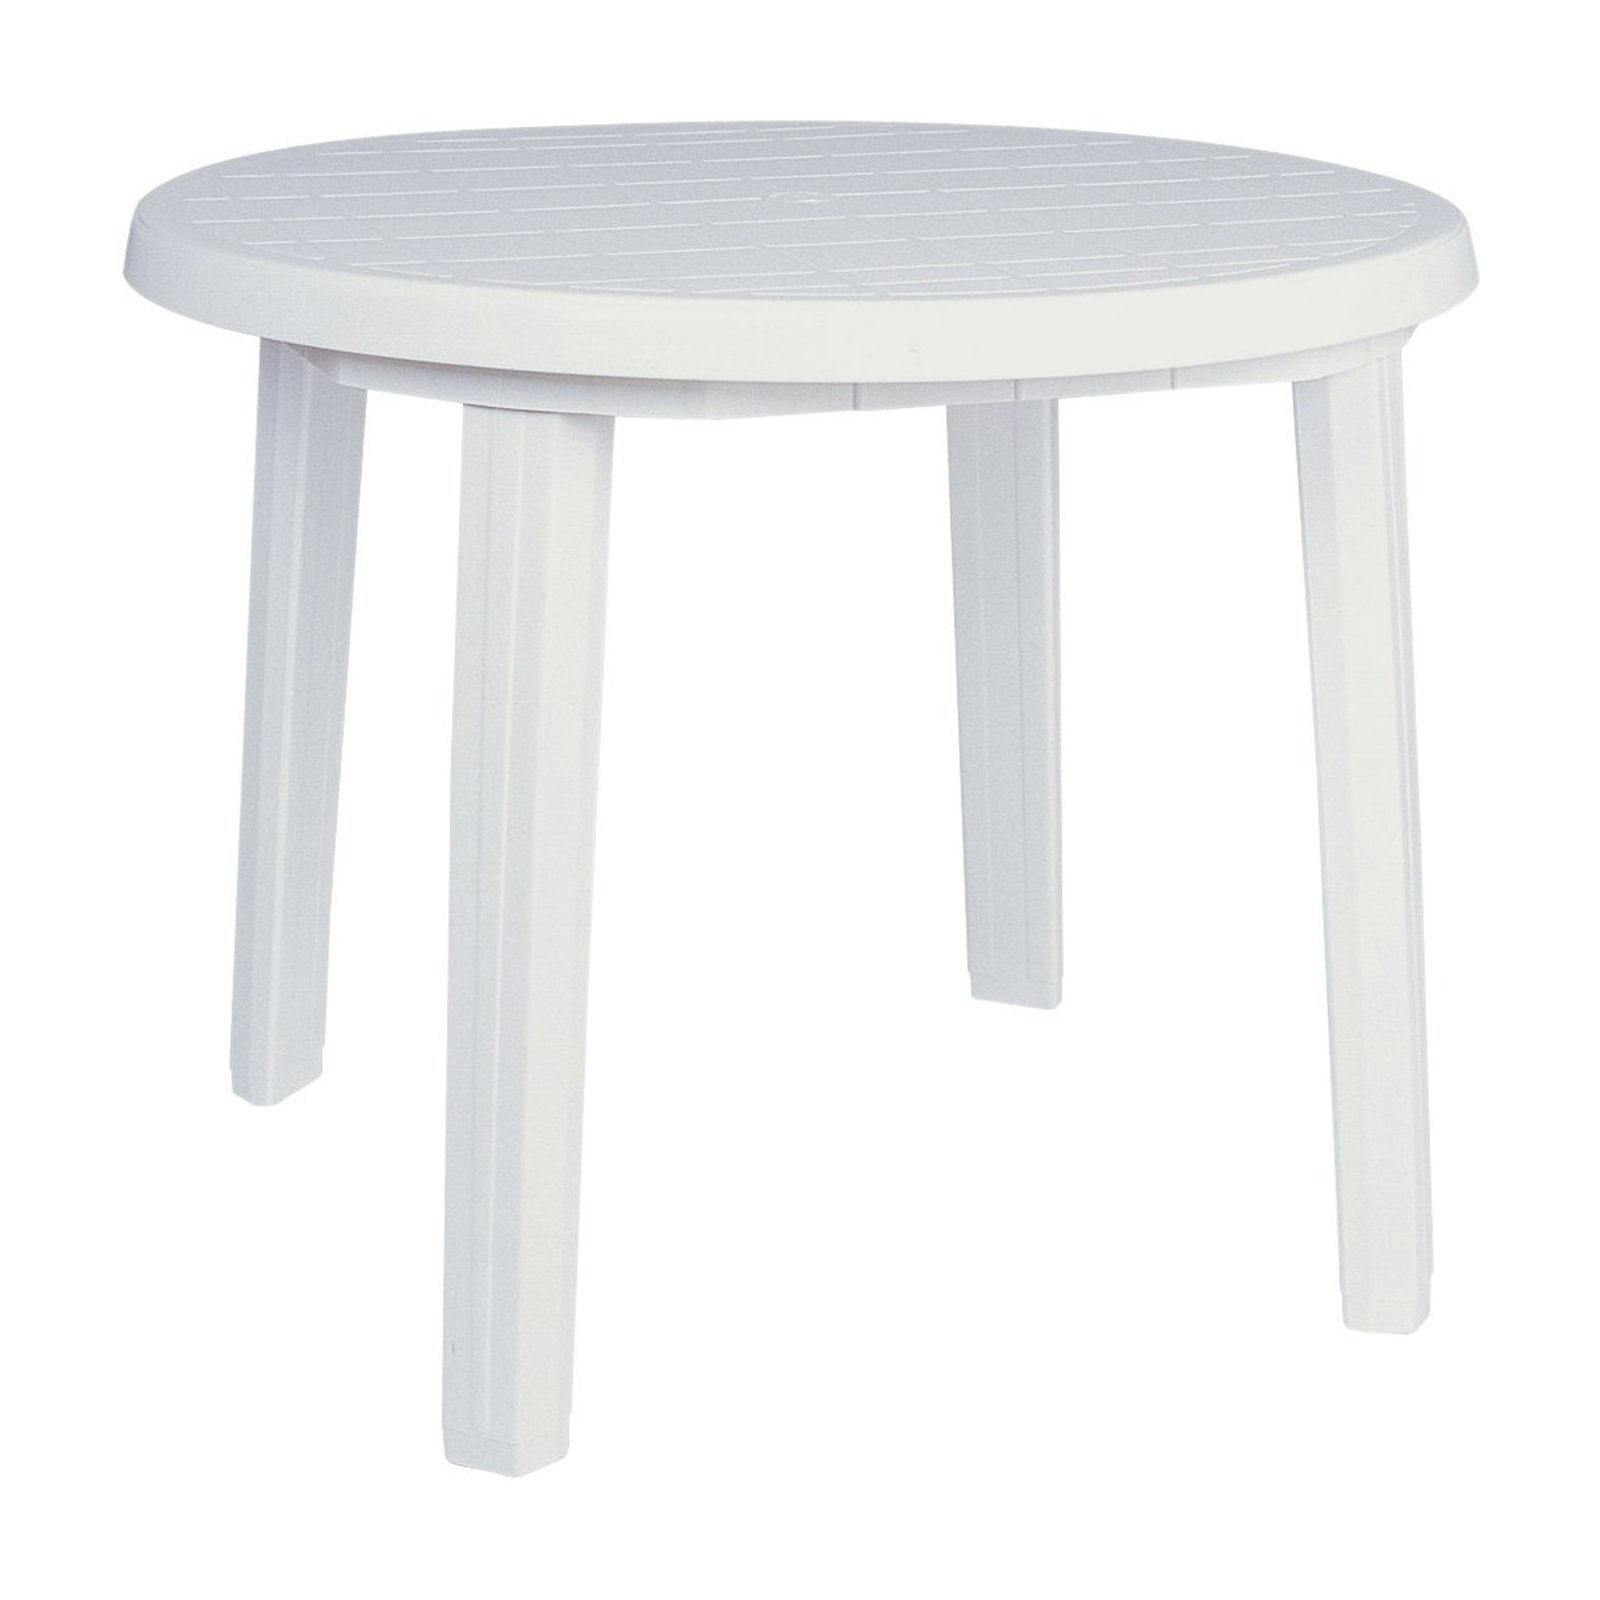 Ronda 35.5" White Round Resin Patio Dining Table with Umbrella Hole